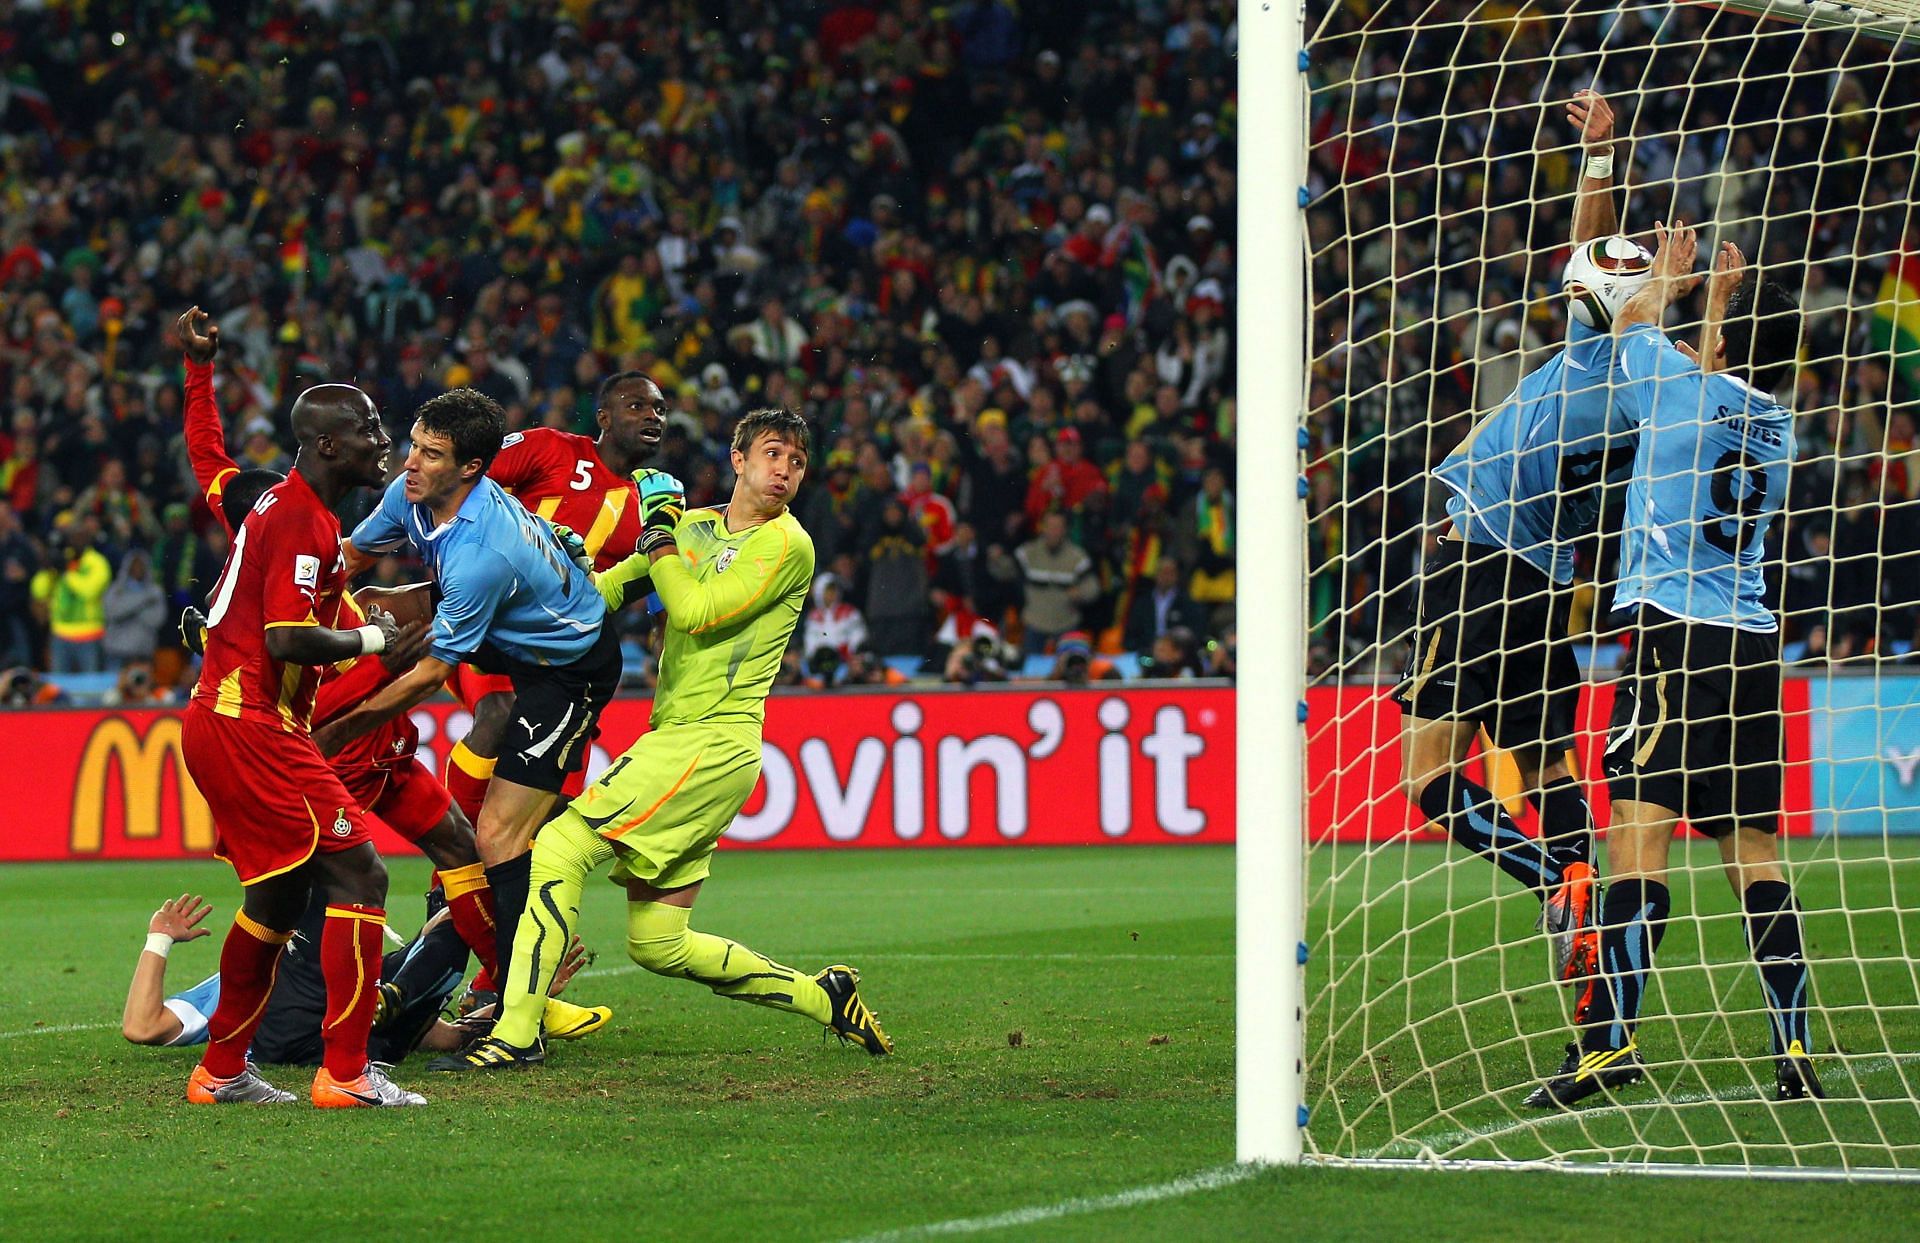 Suarez deliberately handled the ball on the goal line, denying Ghana a clear goal-scoring opportunity.